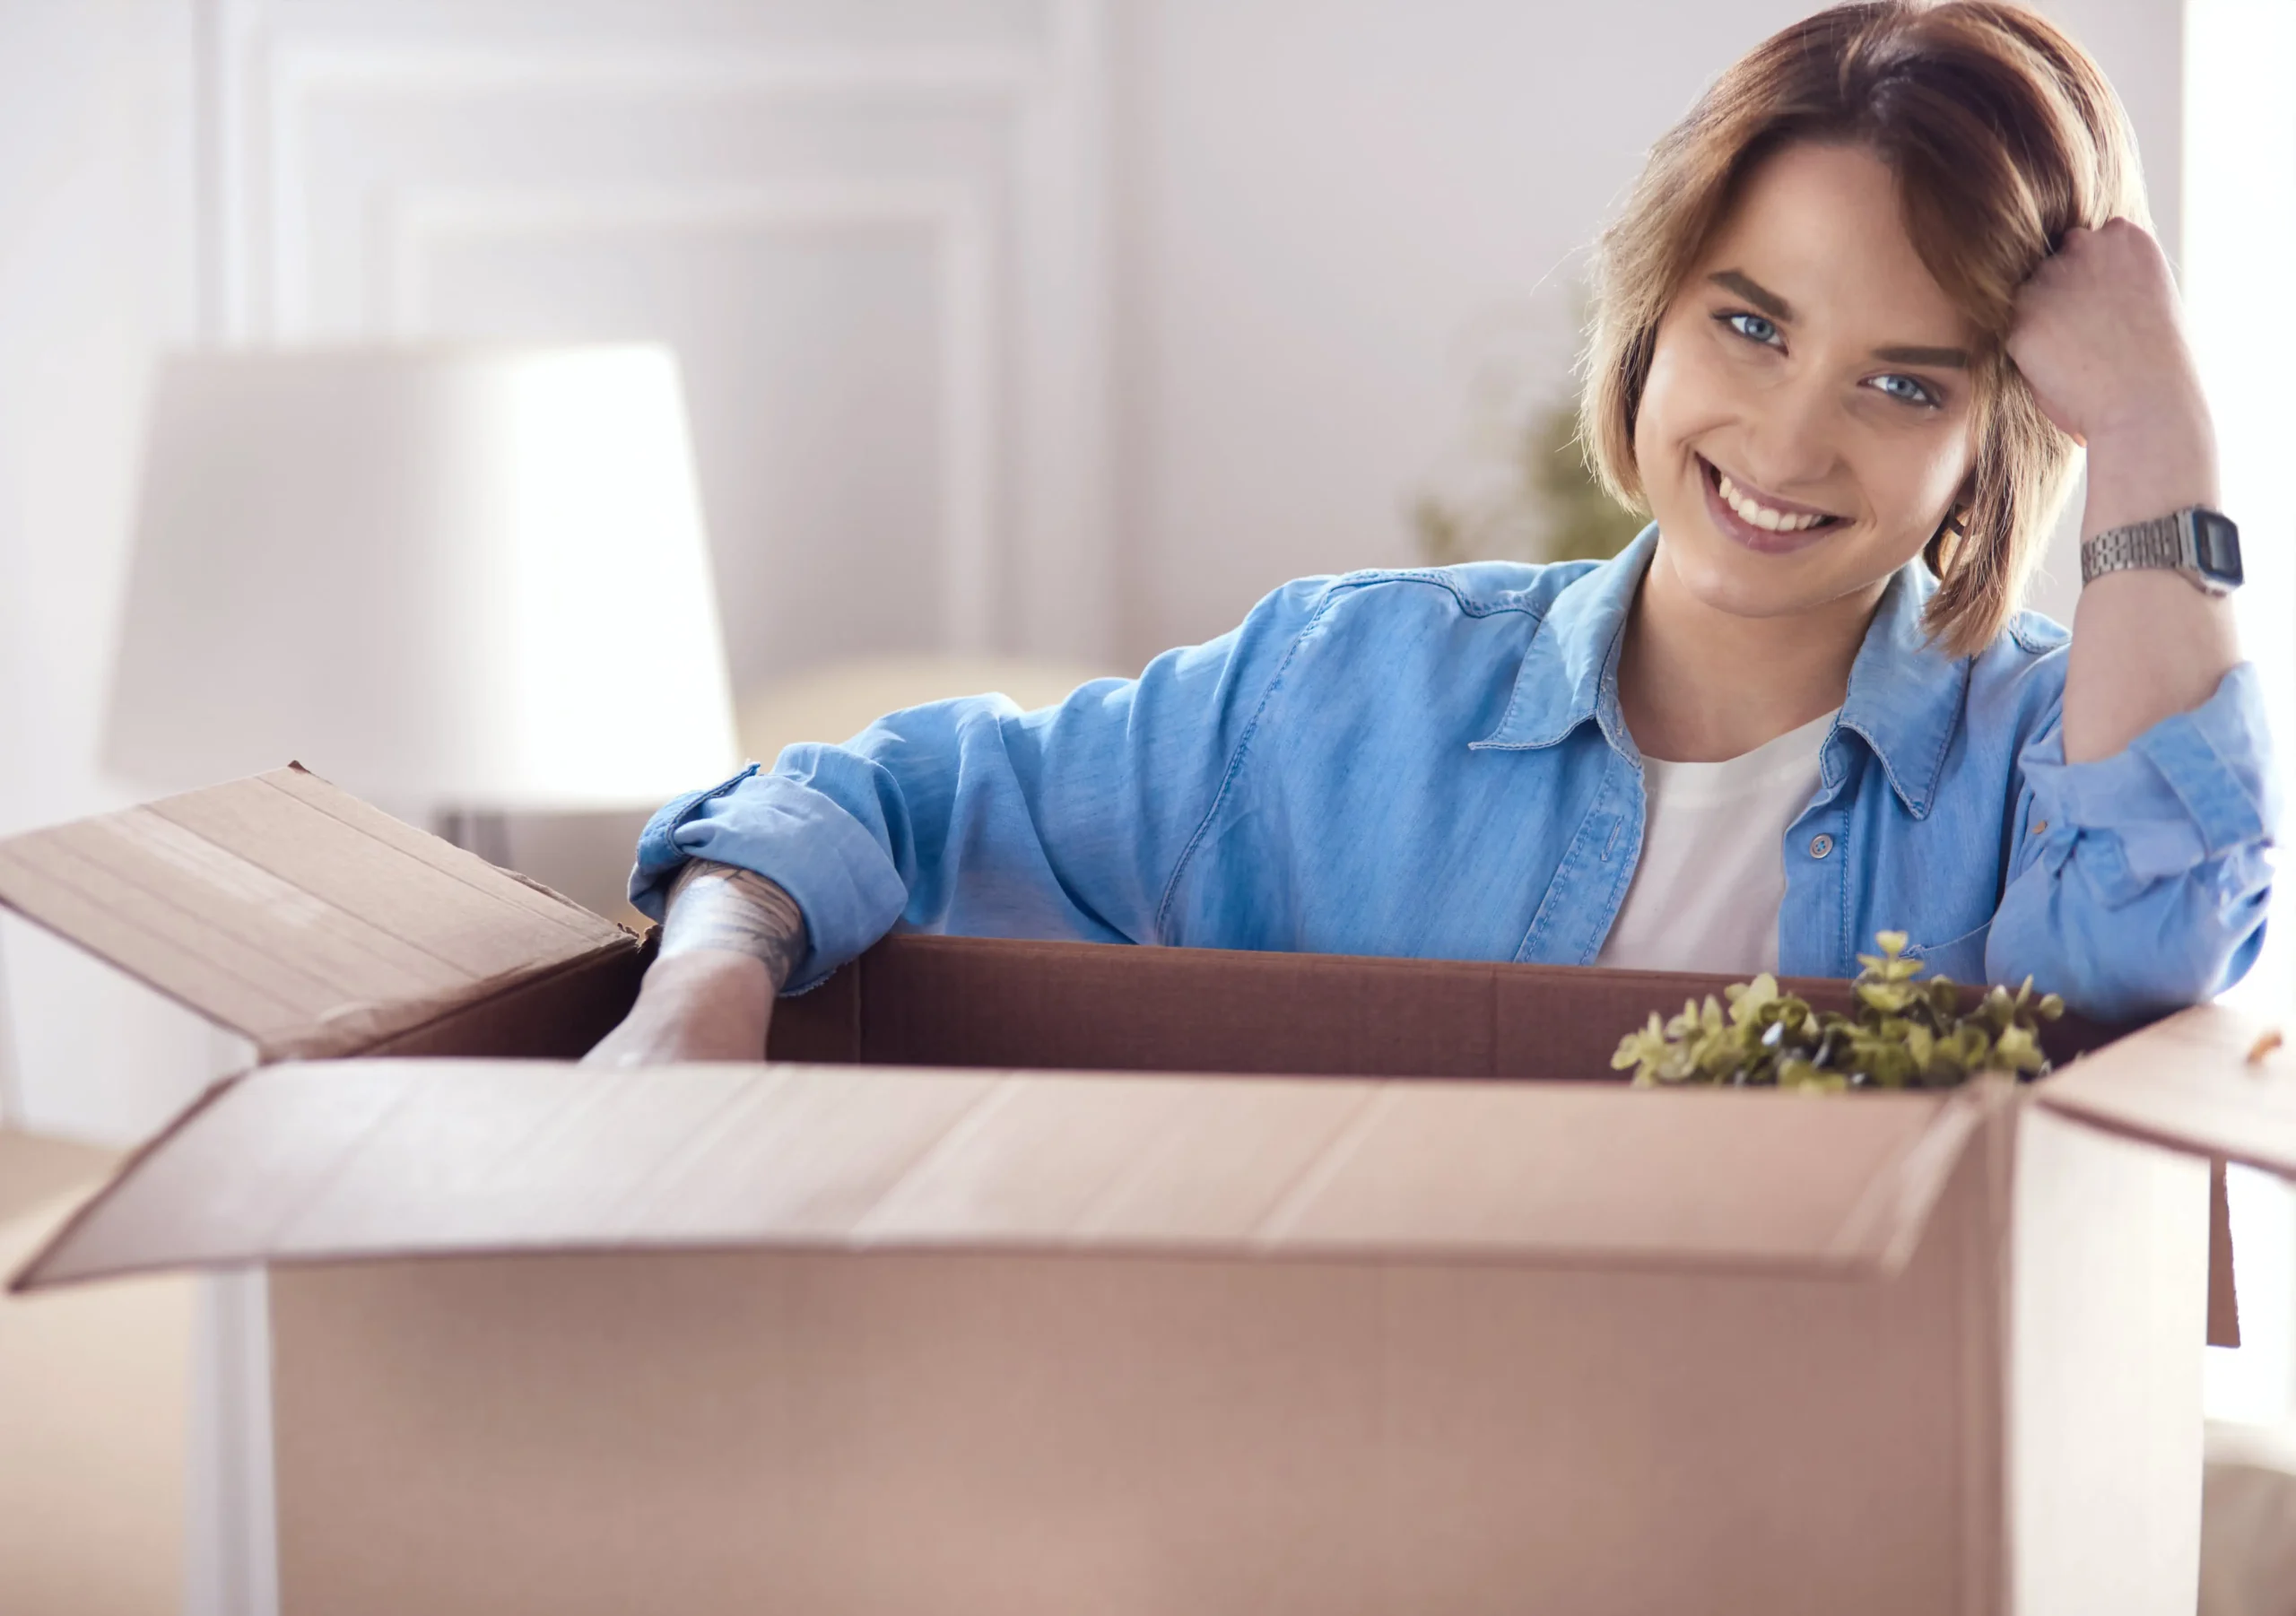 Packing & Unpacking Services: Let Us Handle the Hassle